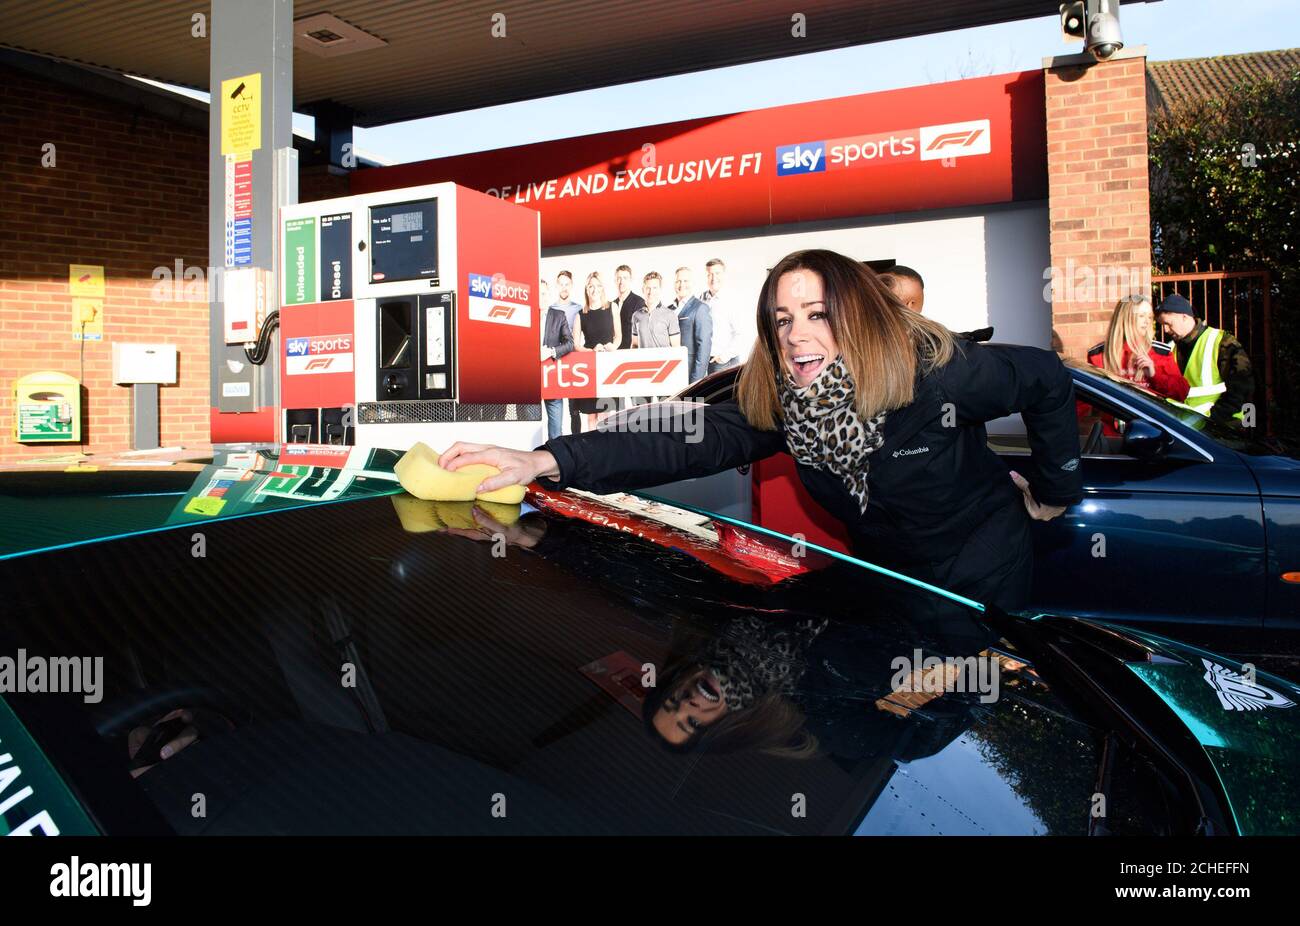 EDITORIAL USE ONLY Natalie Pinkham, pit lane reporter, cleans cars as Sky Sports F1 takes over a garage in High Wycombe in Buckinghamshire, to give drivers the ultimate pit stop experience to